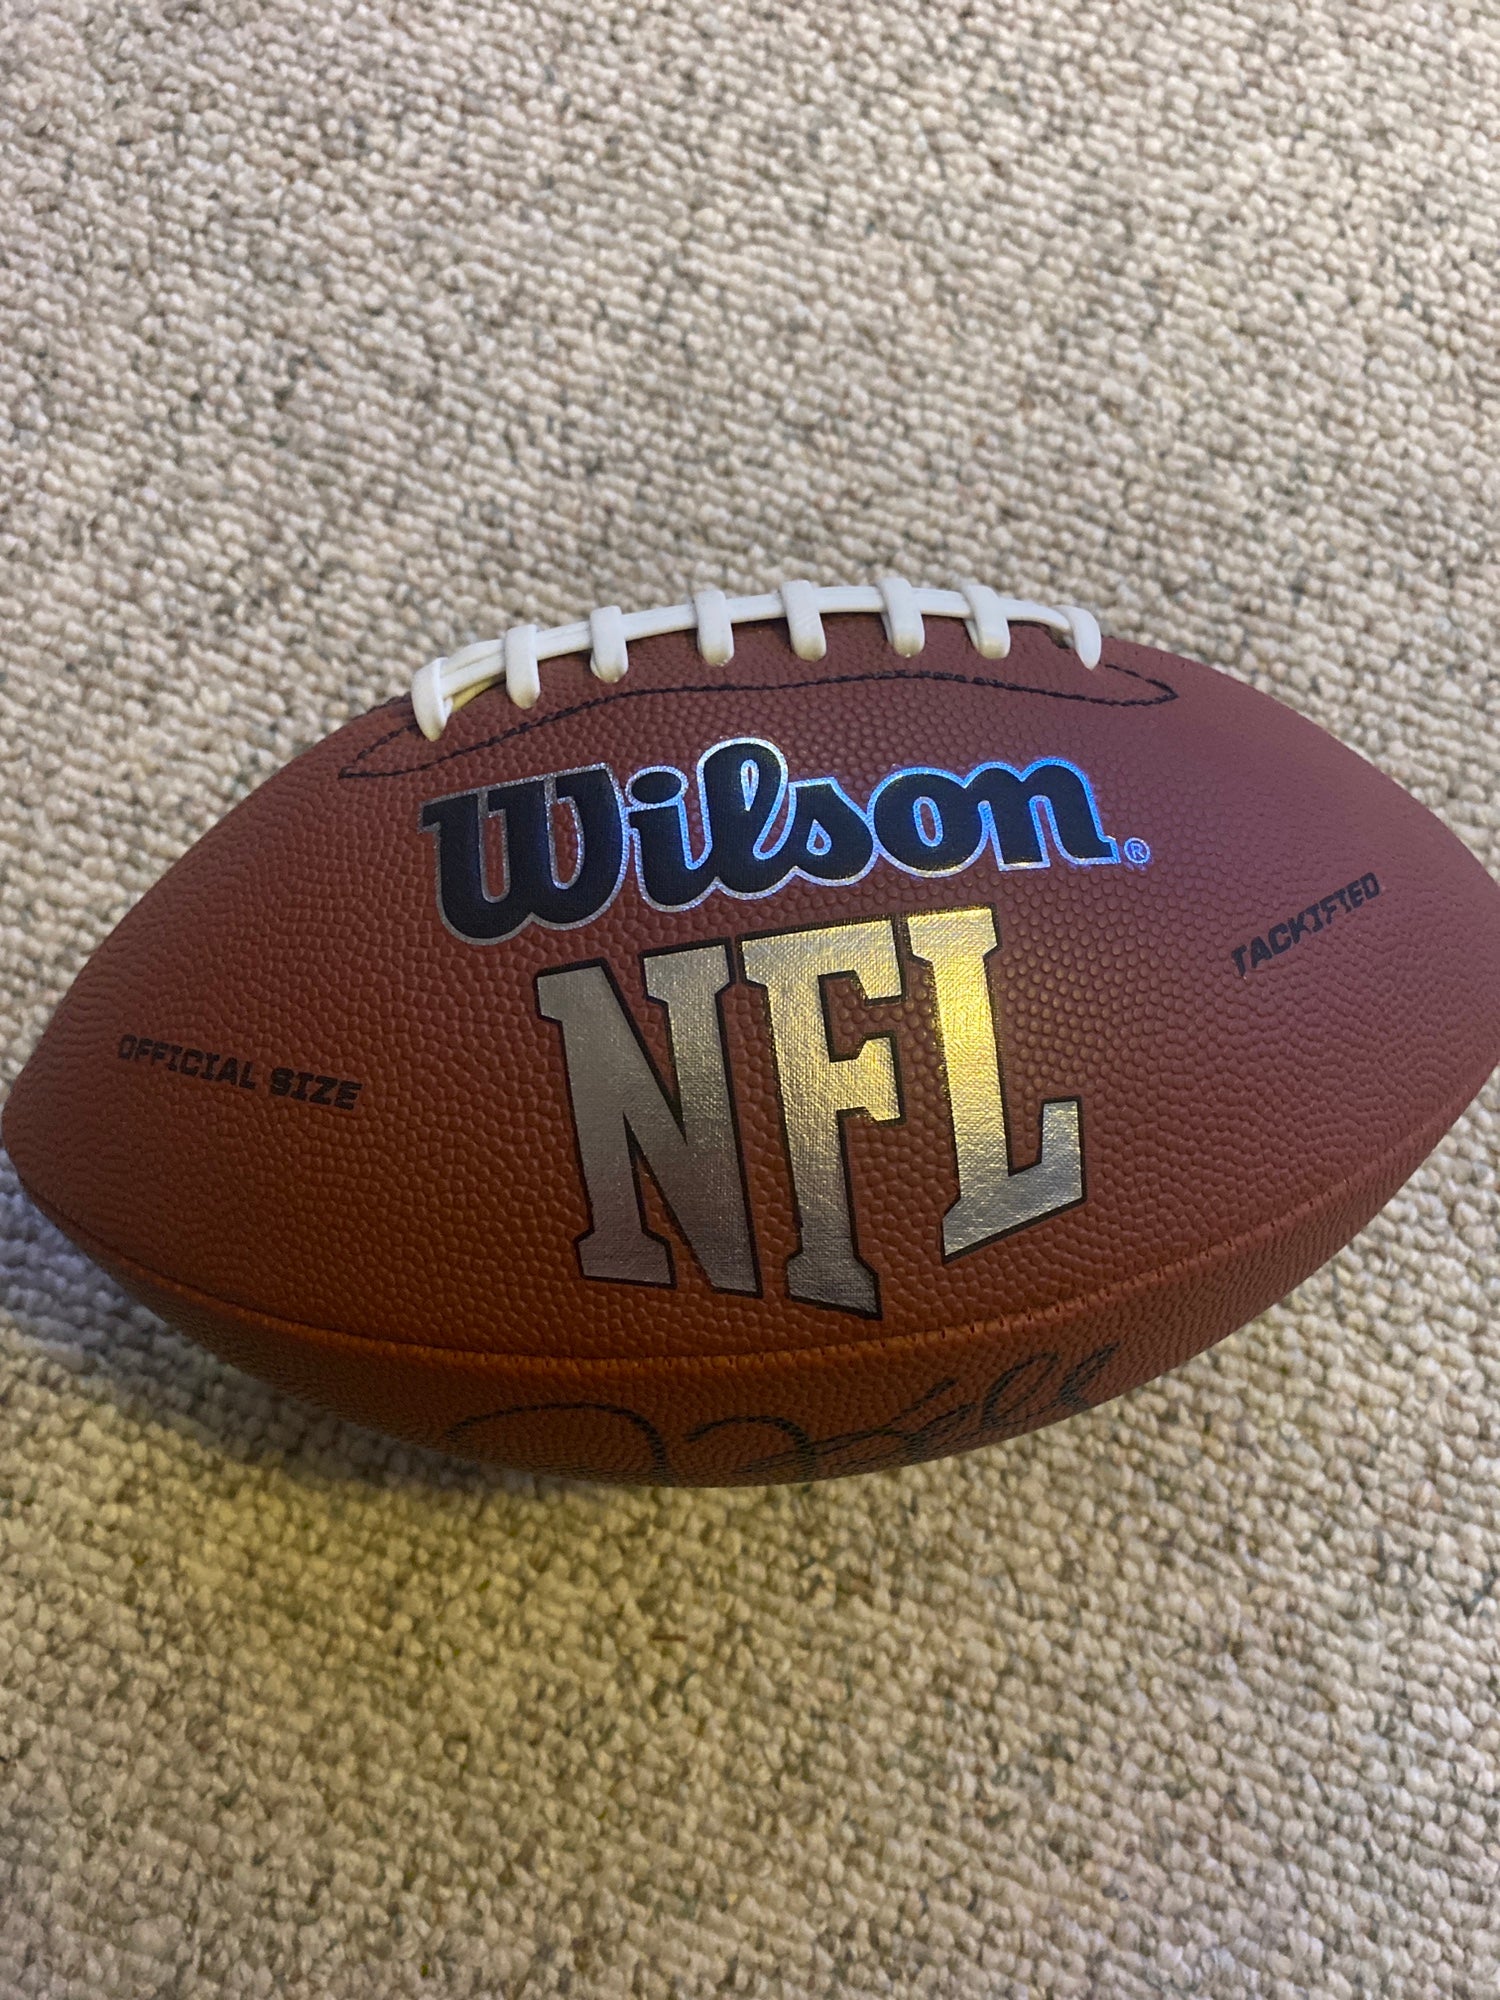 wilson nfl official tackified